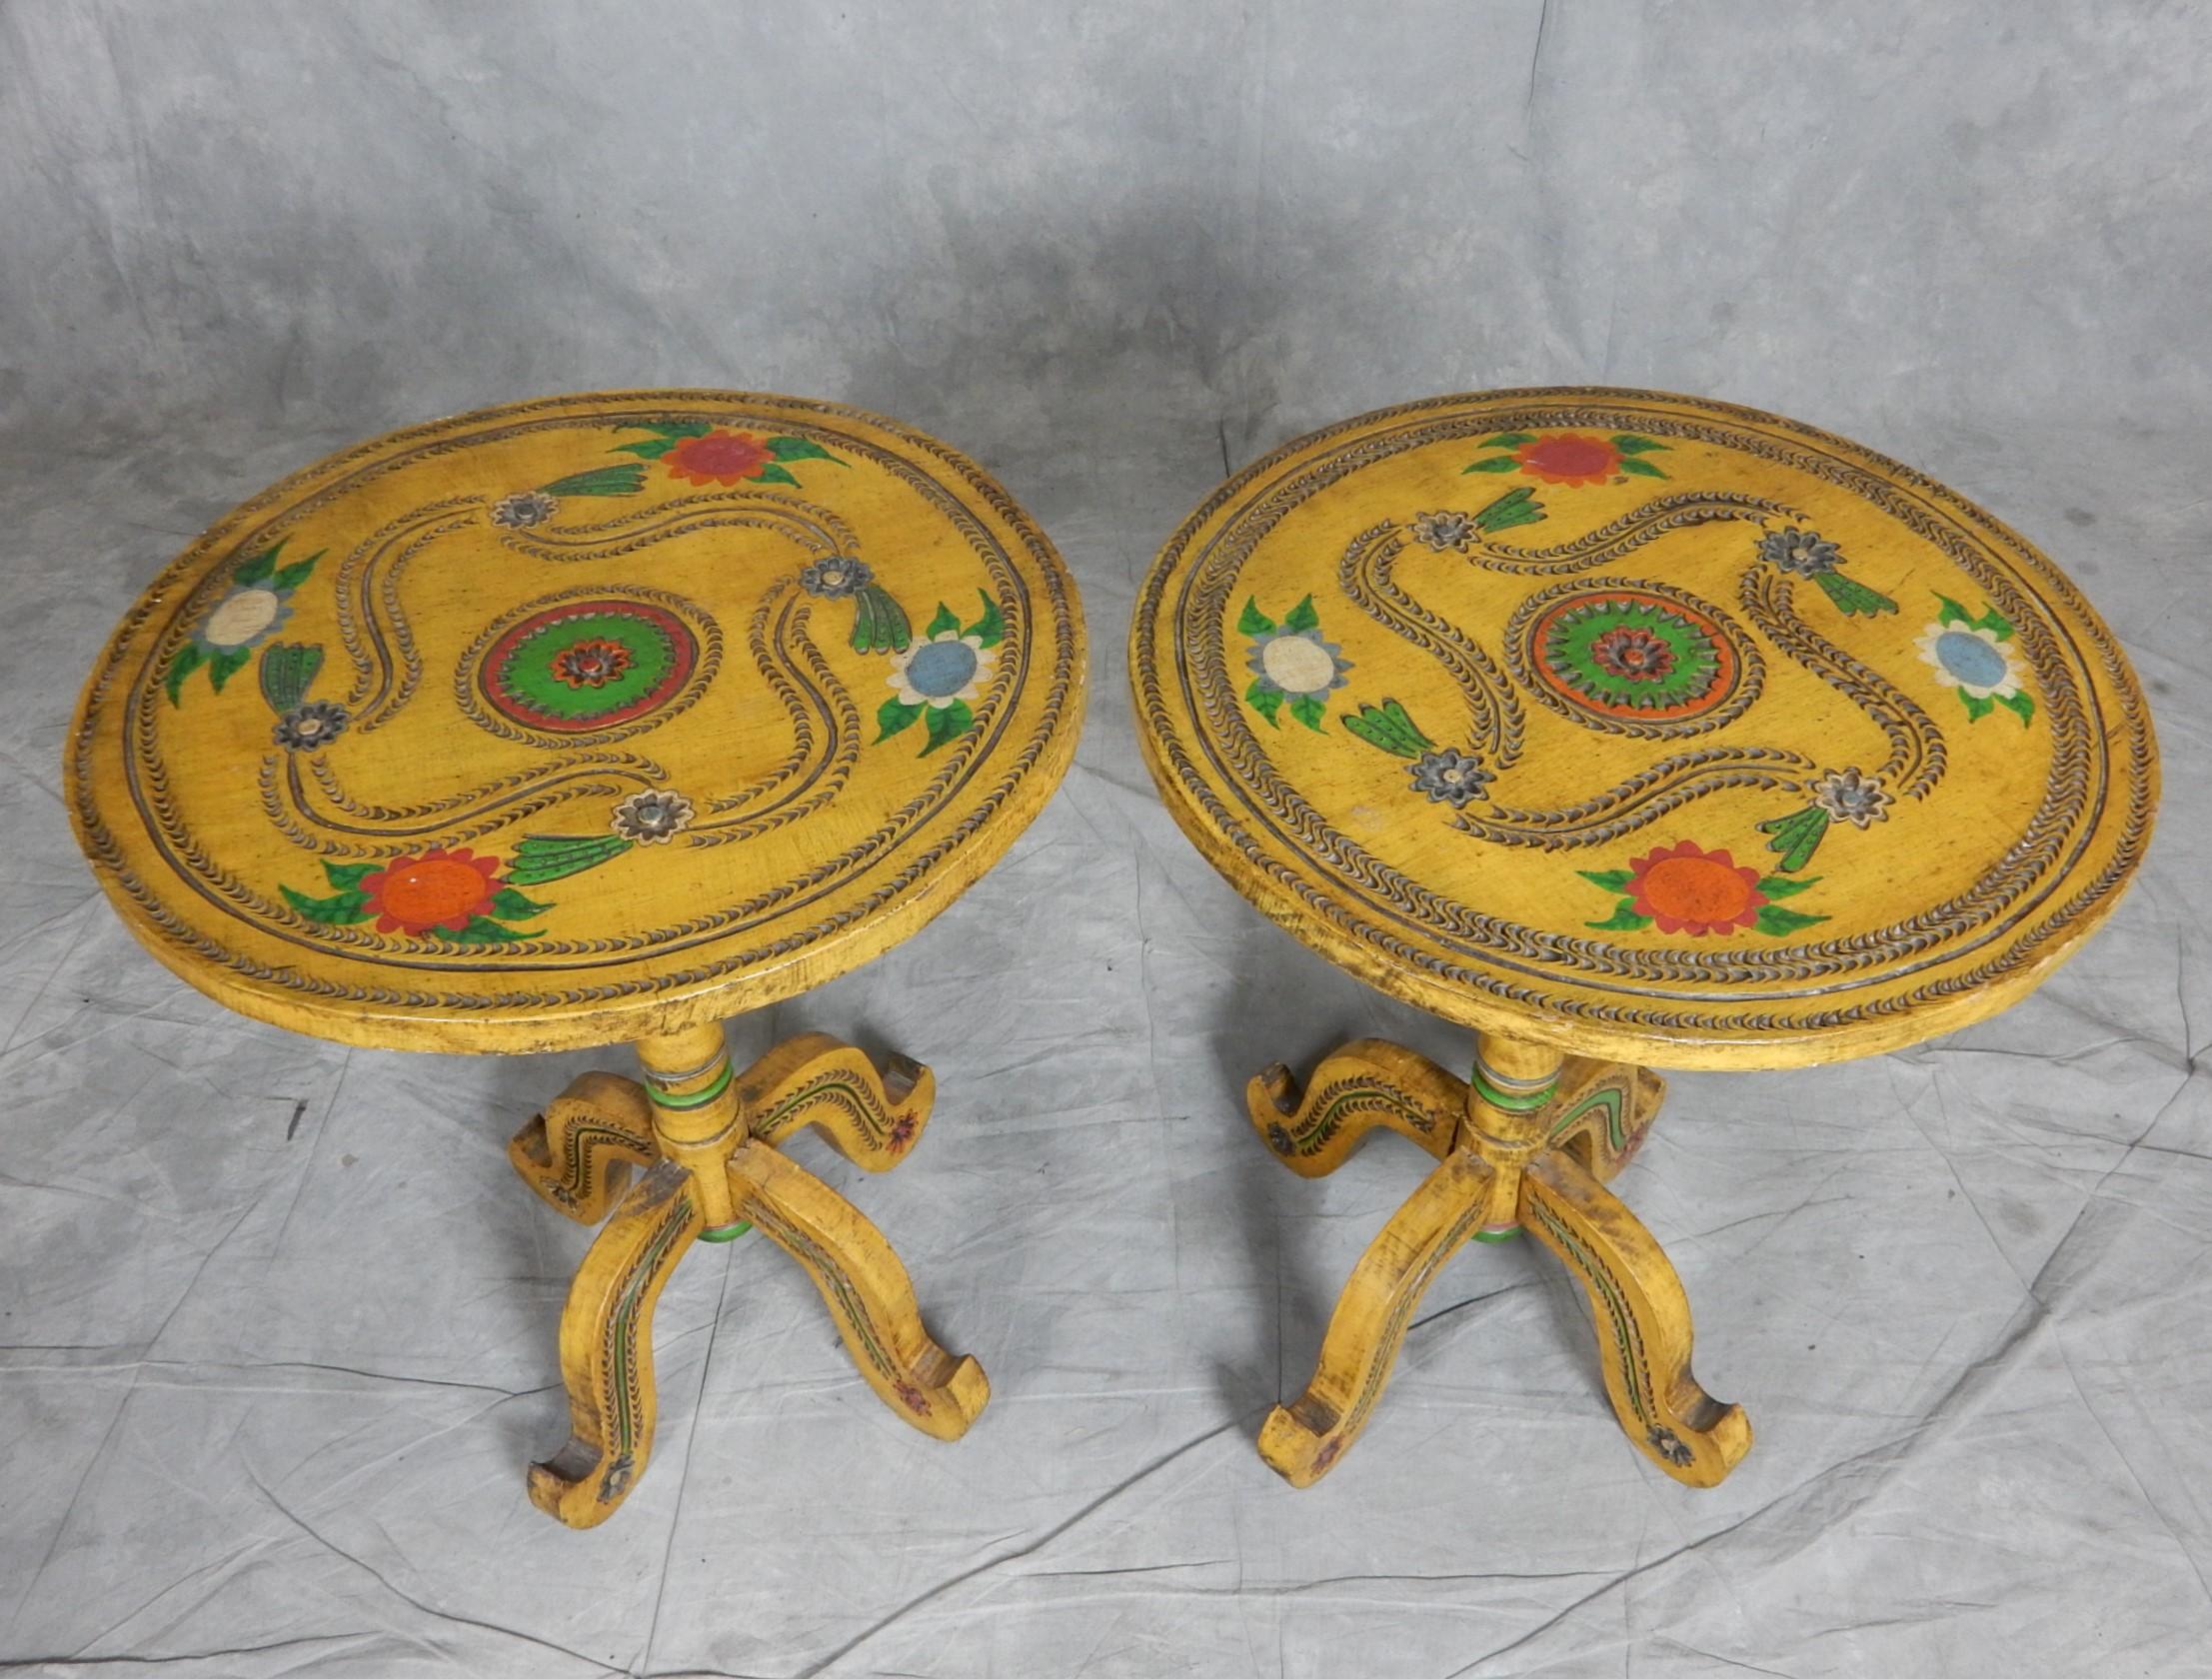 Charming antique Scandinavian folk art tables. 
These have an old world feel to them.
Hand carved with painted floral design.
Not signed or marked. Approx circa 1930's or earlier.
24in tall X 21in wide.